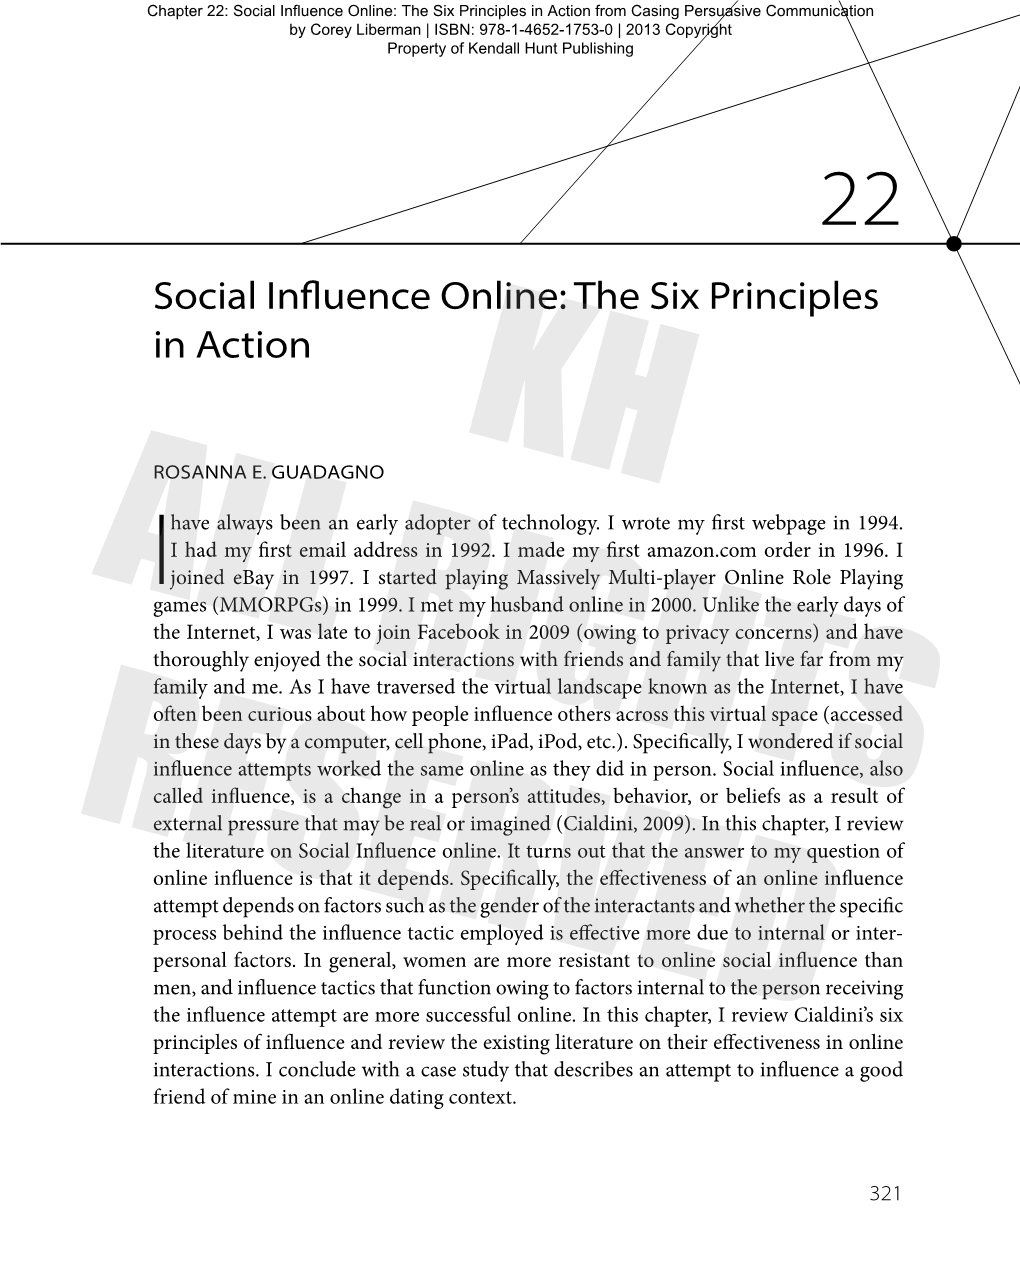 Chapter 22: Social Influence Online: the Six Principles in Action